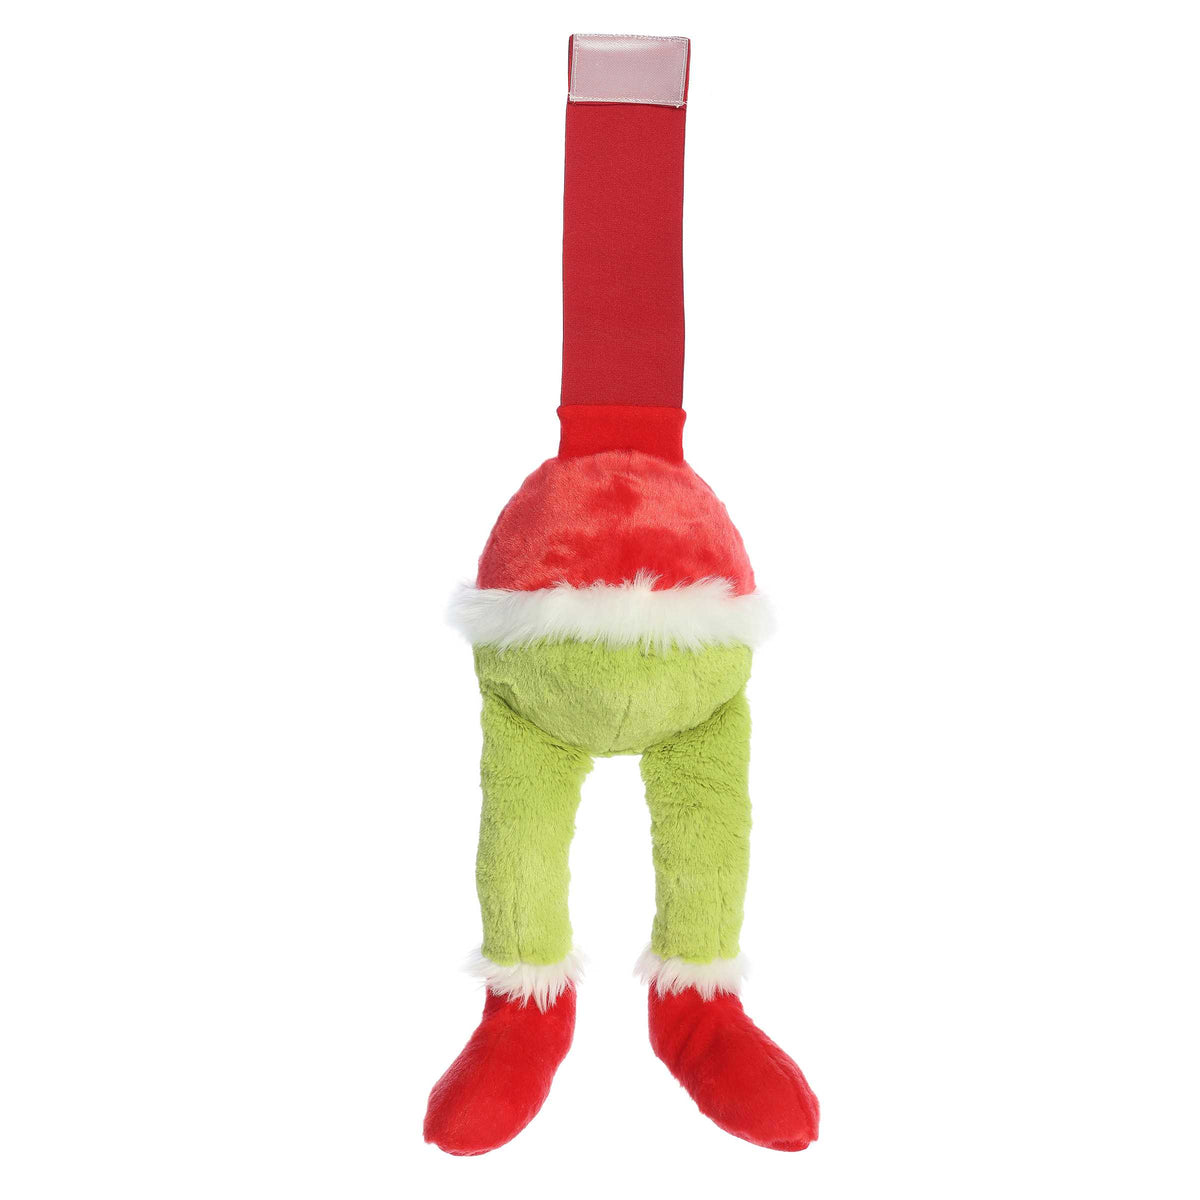 Bottom half of the Grinch plush doll in a Santa outfit intended for the trunk of a car for a festive decoration